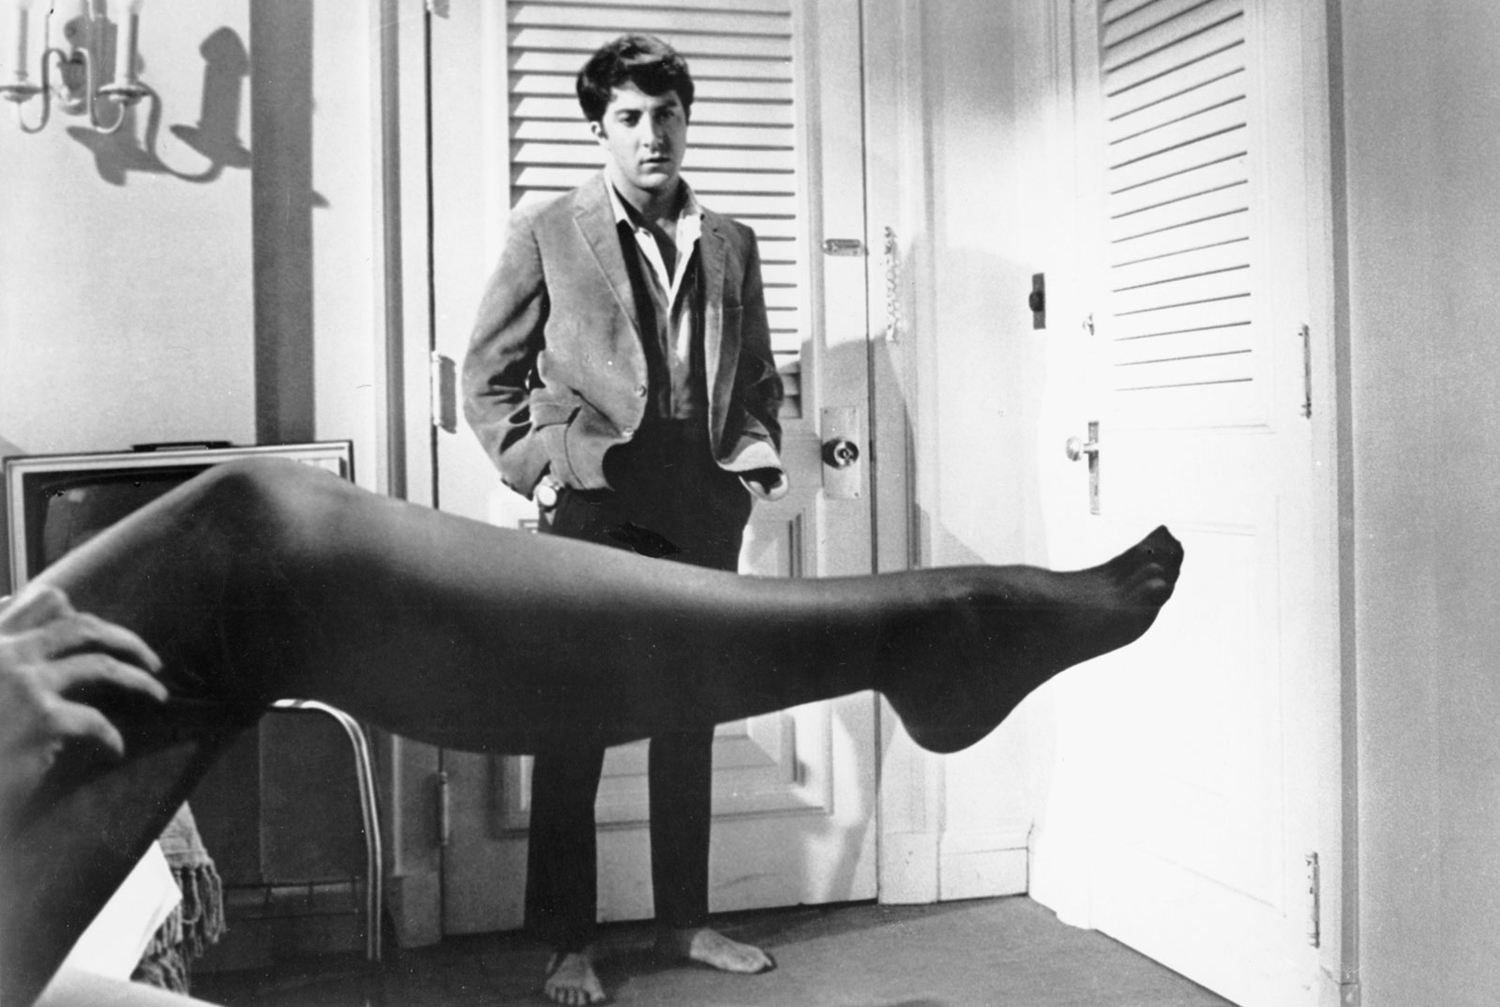 Dustin Hoffman will always be remembered for his famous line: “Are you trying to seduce me, Mrs. Robinson?” However, Dustin actually said, “Mrs. Robinson, you’re trying to seduce me. Aren’t you?”